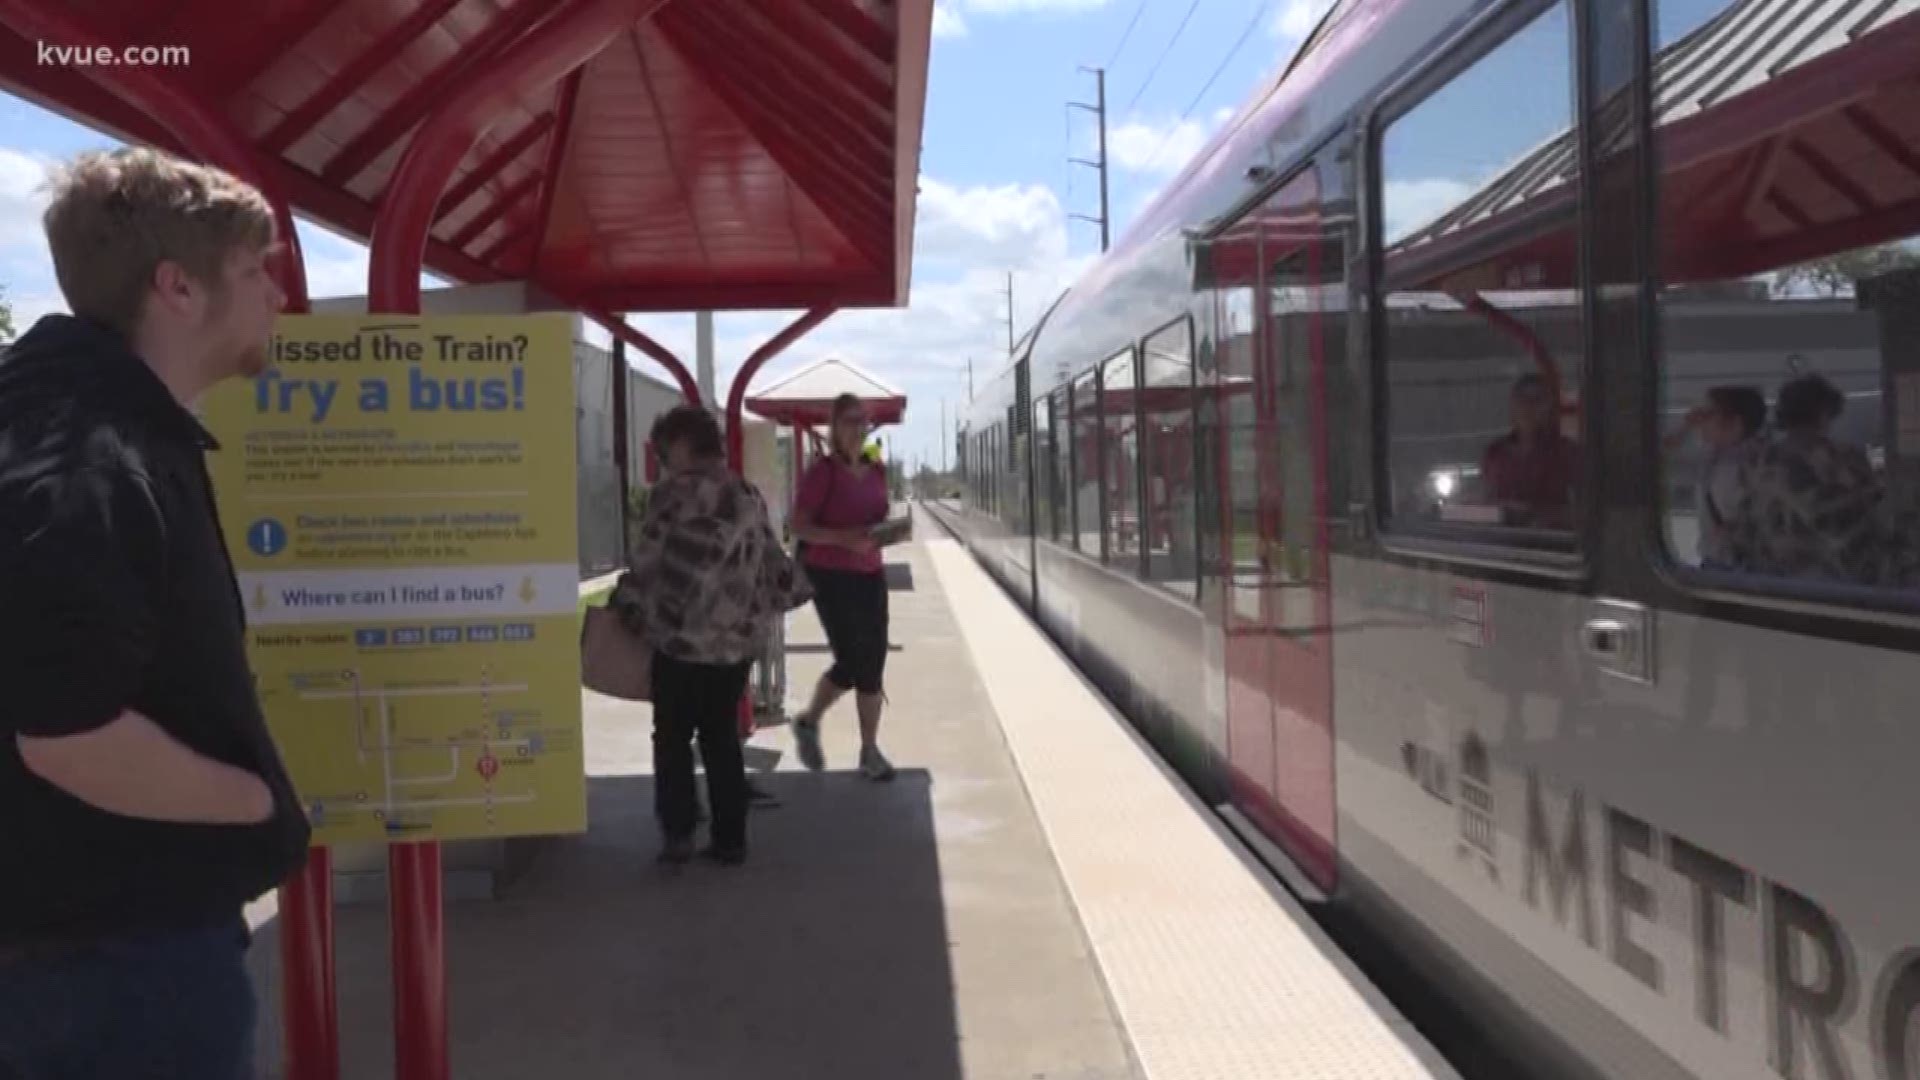 Capital Metro is implementing a new schedule for its Metro Rail line this week. This comes after complaints that trains are sometimes behind schedule and, in some cases, not running at all.